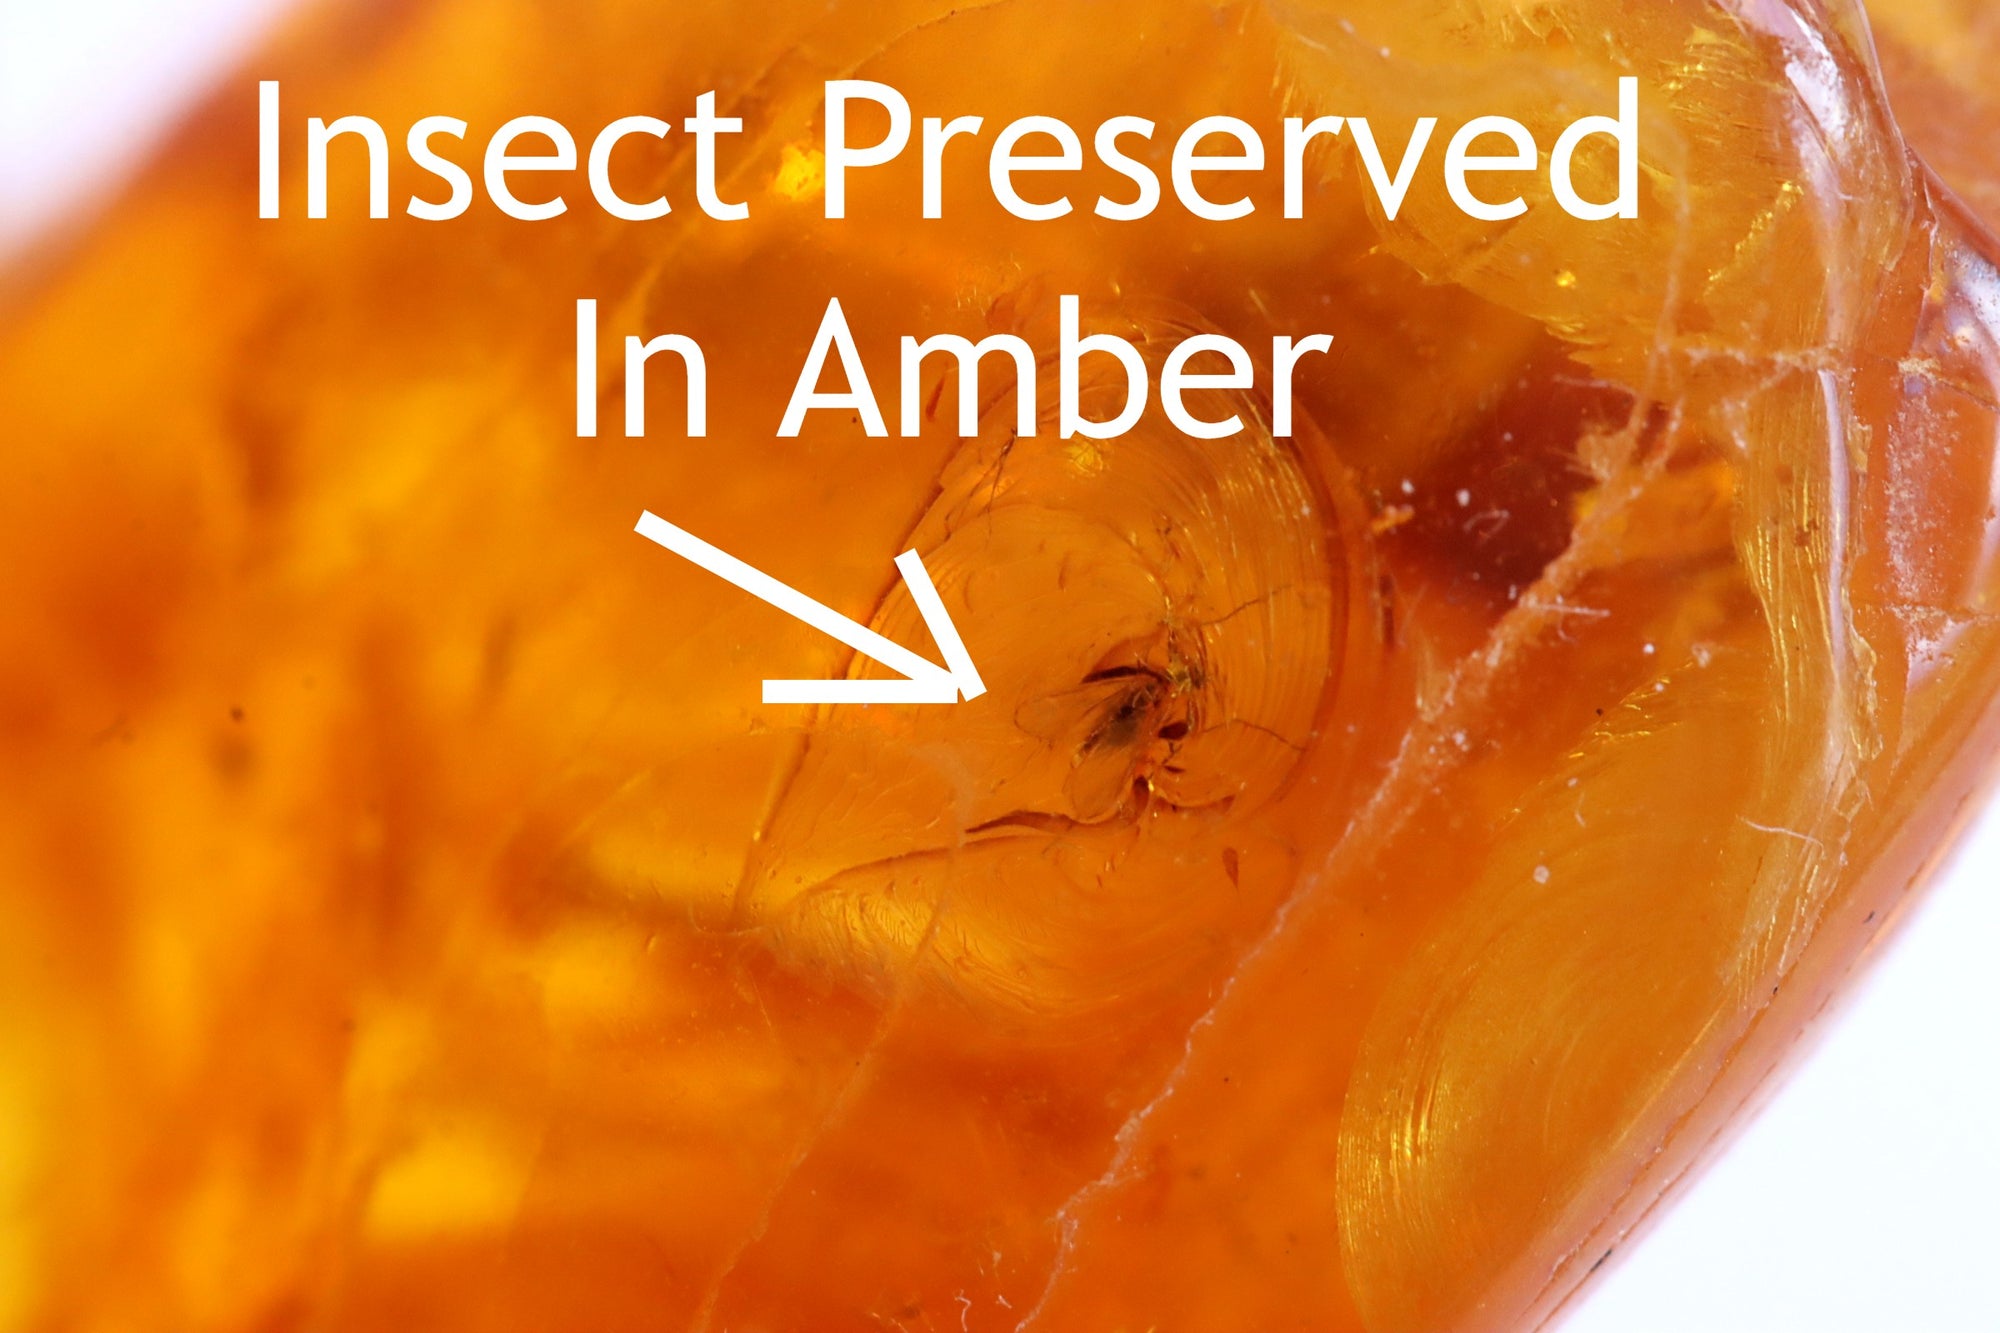 Insect Preserved In 40 million year old Baltic Amber